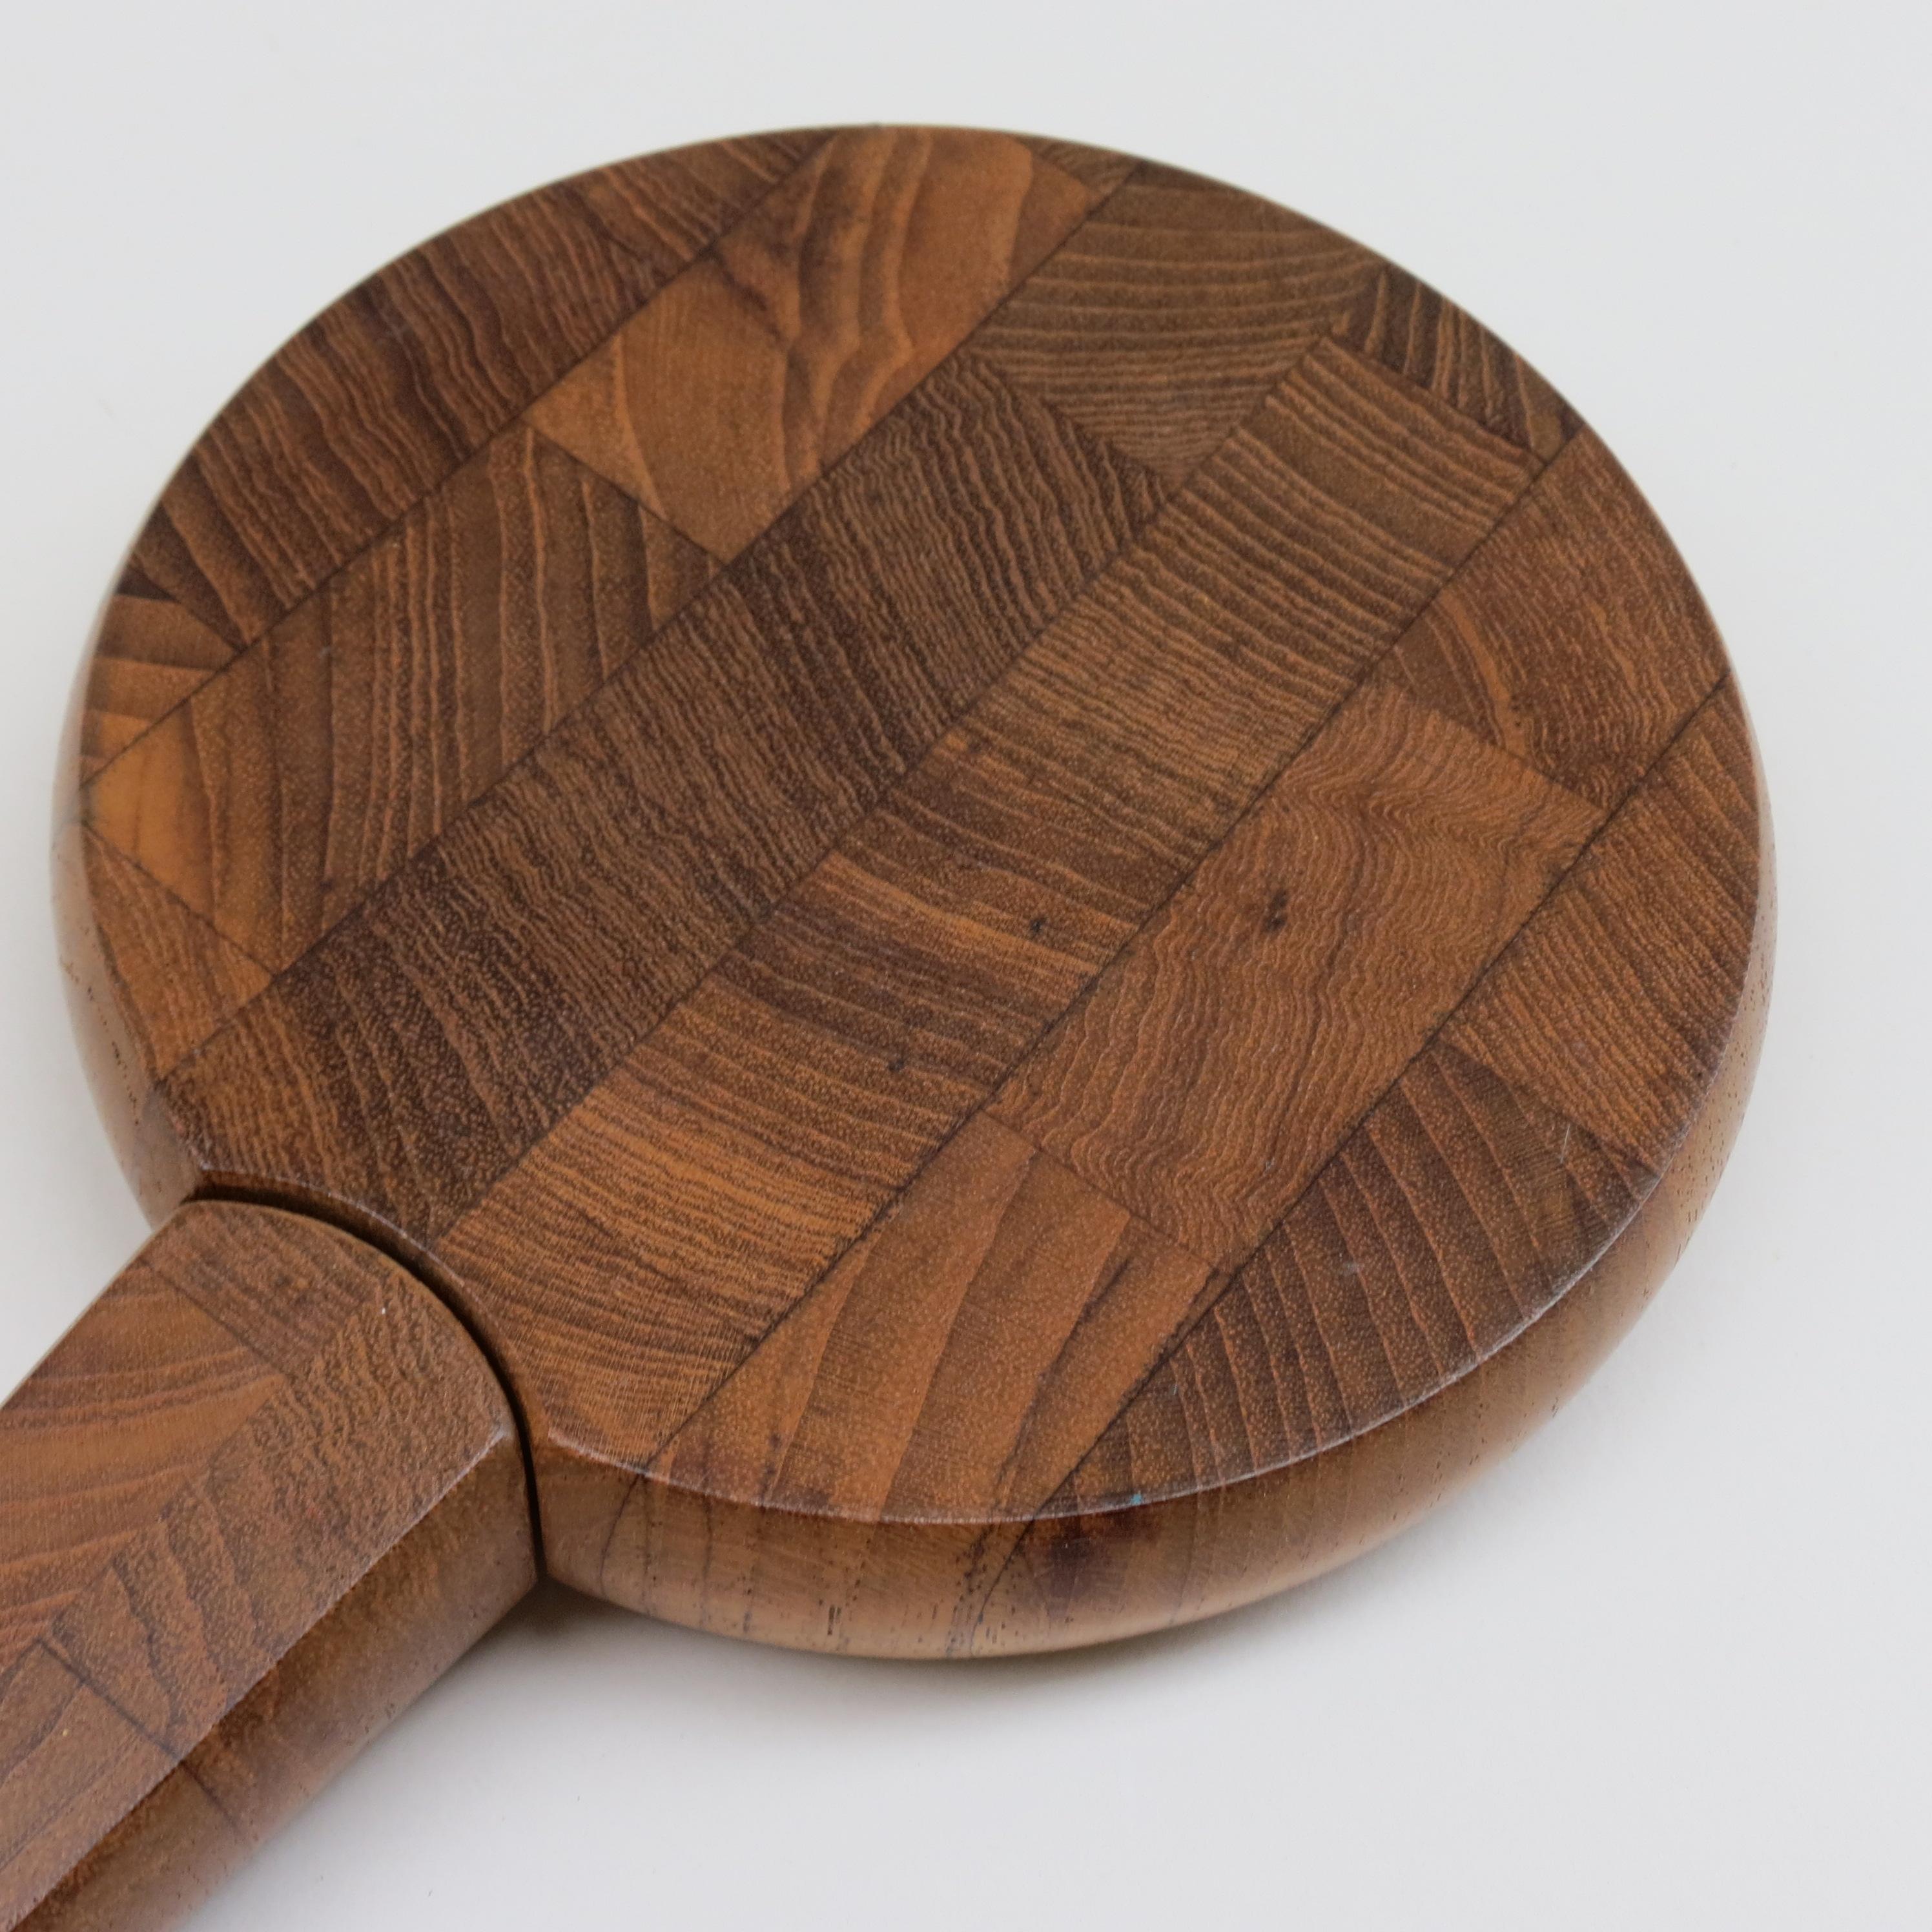 Machine-Made 1950s Danish Cheese board and Knife by Dansk Design Jens Quistgaard